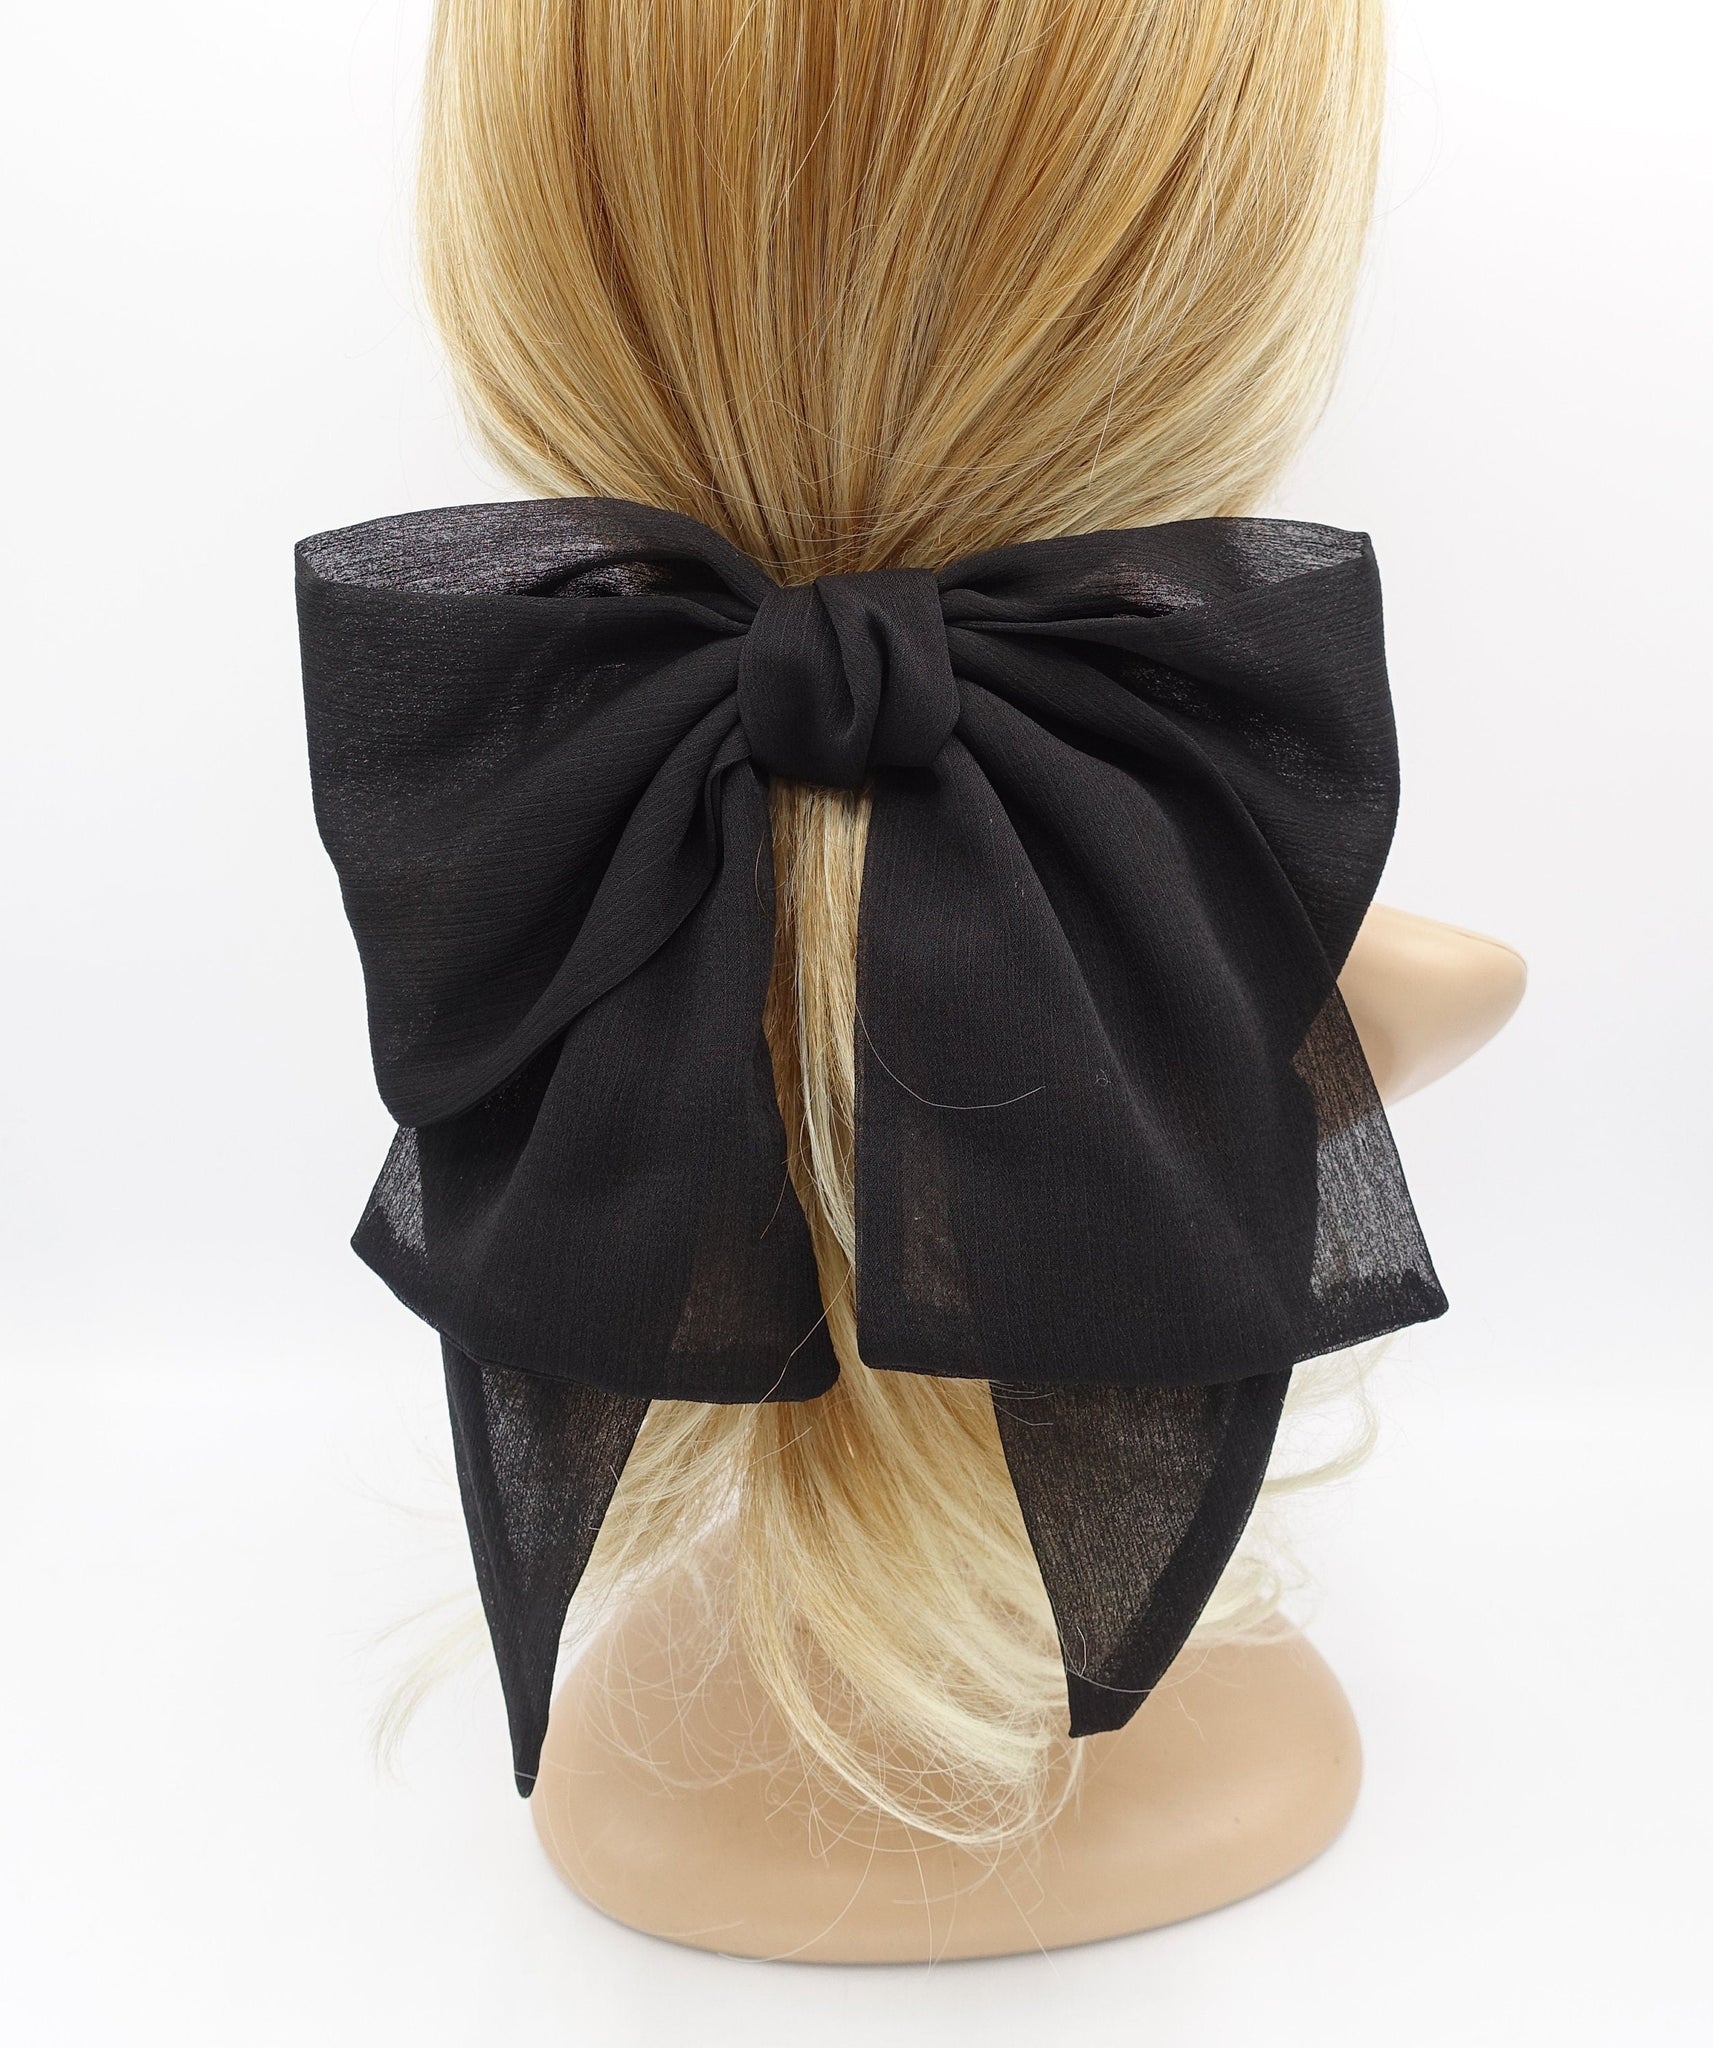 VeryShine Black chiffon 2 tails hair bow large hair accessory for women